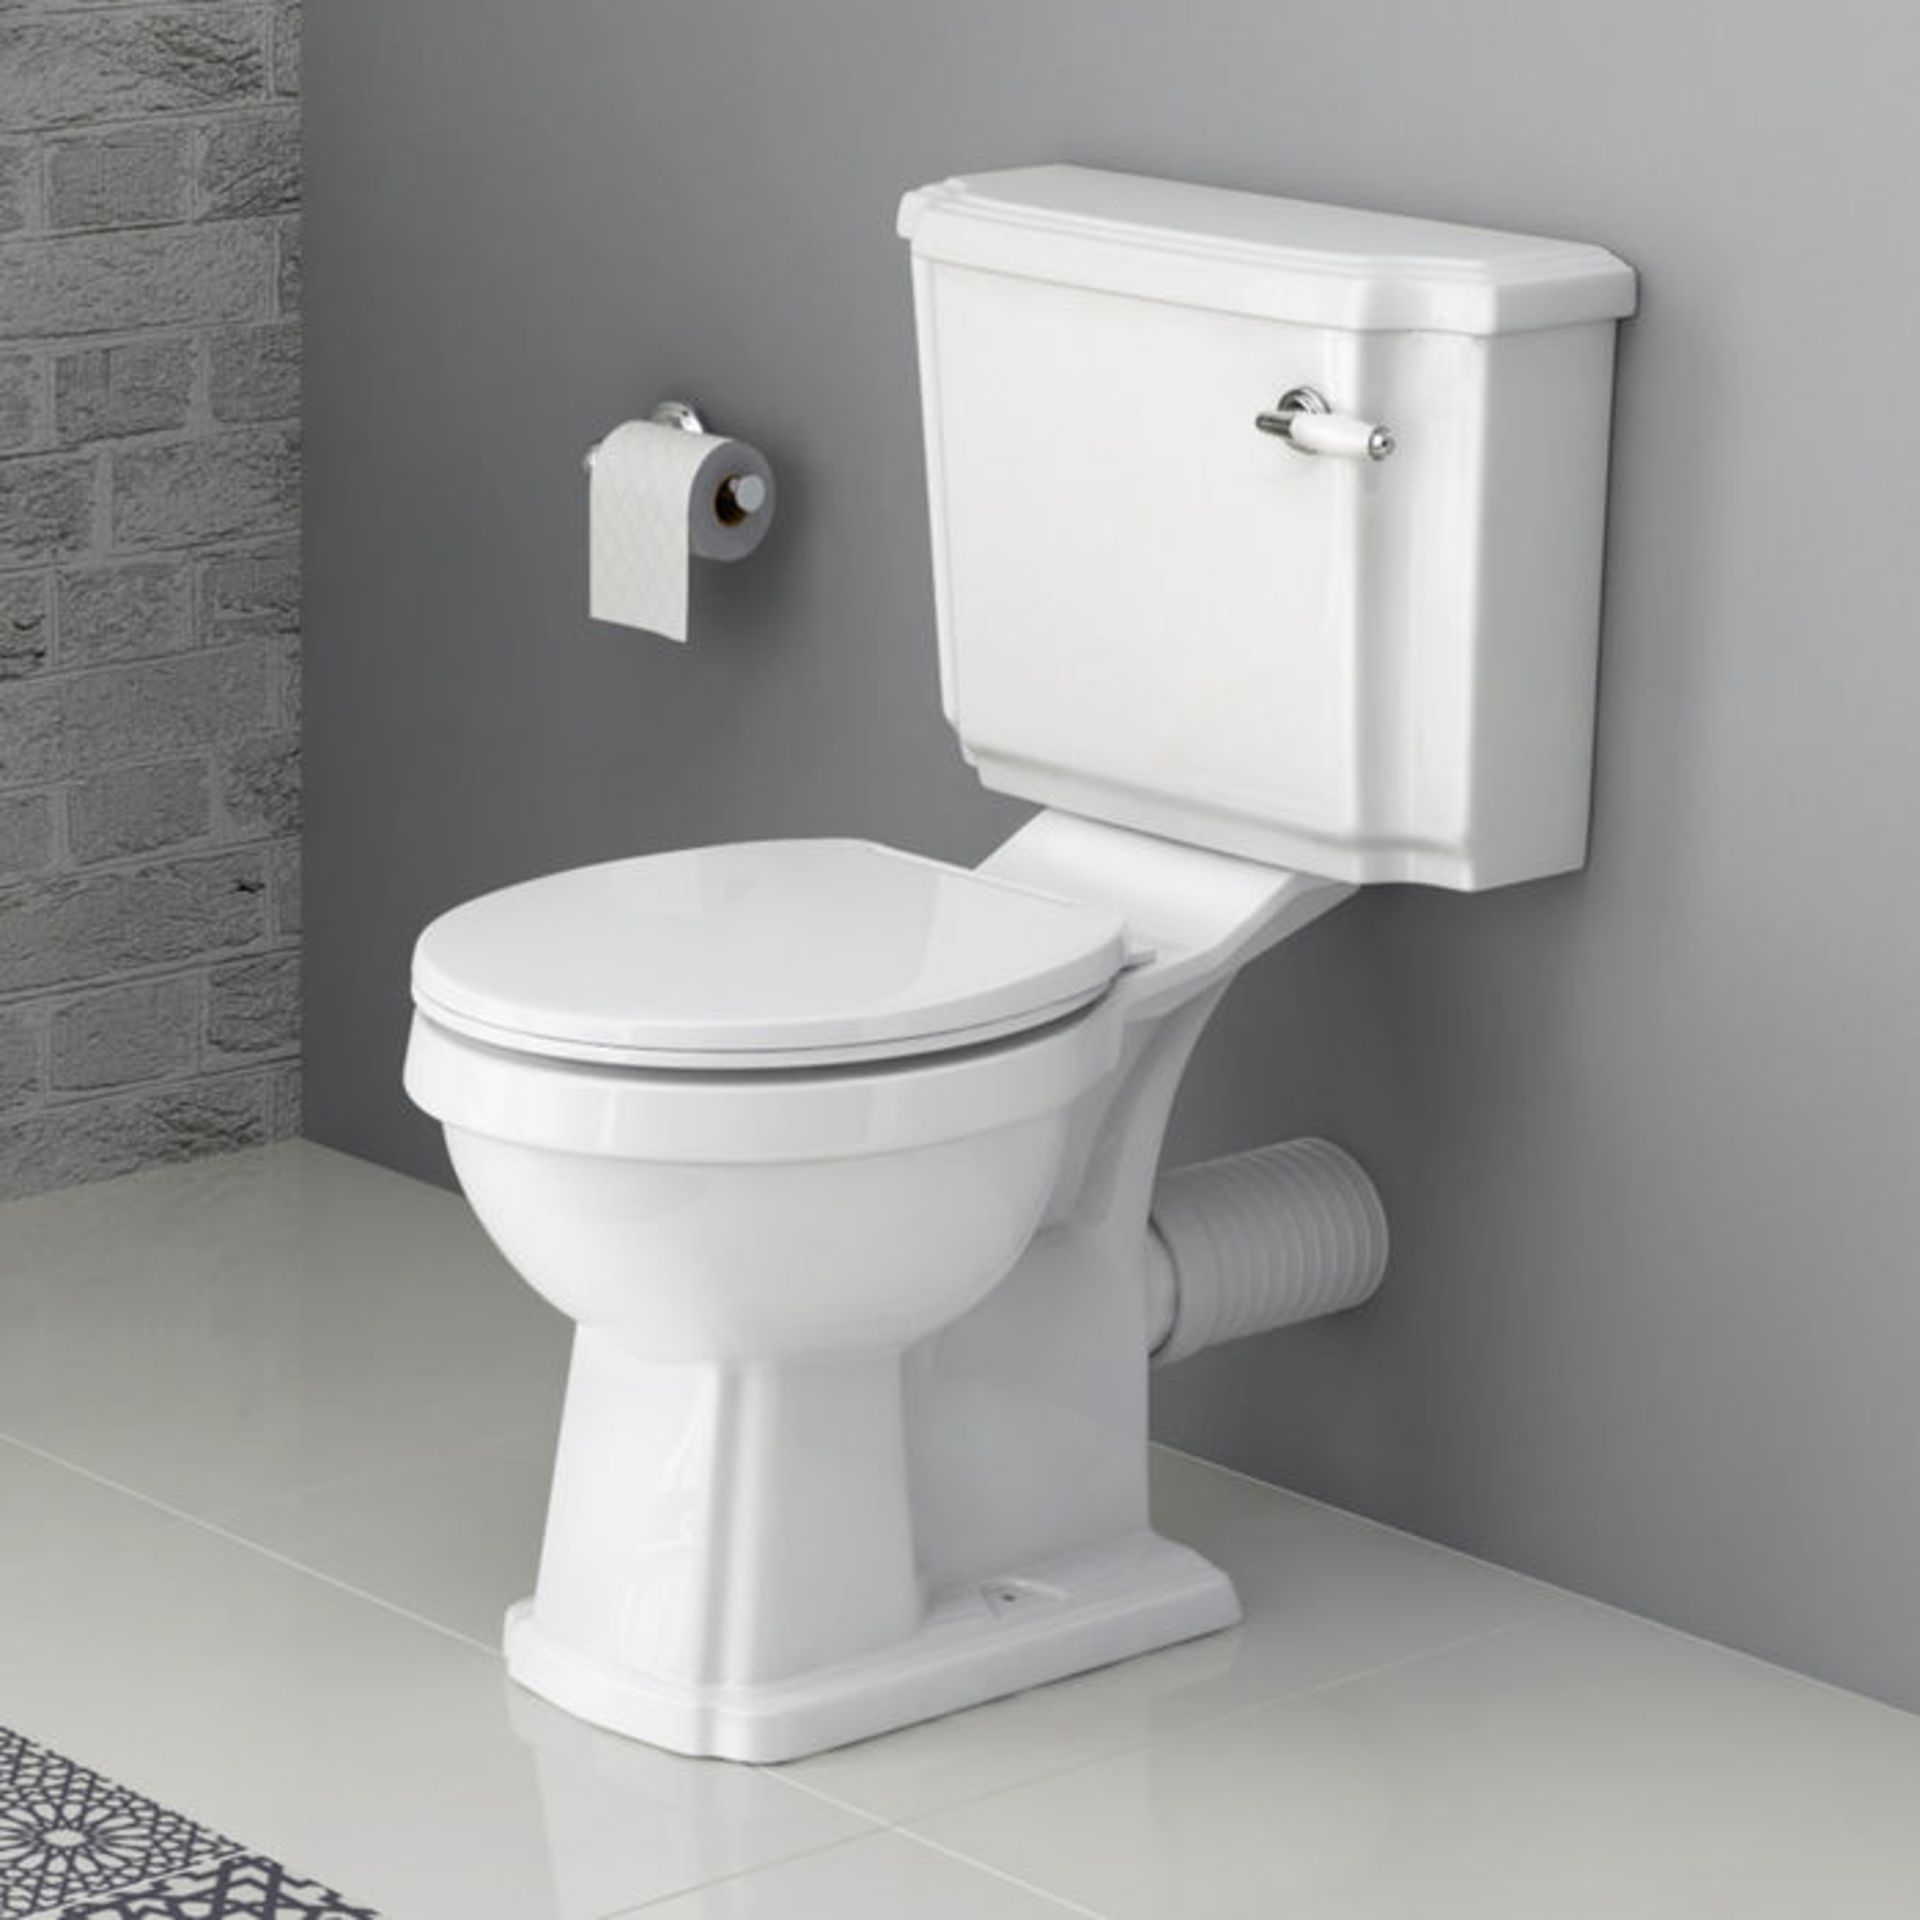 NEW & BOXED Cambridge Traditional Close Coupled Toilet & Cistern - White Seat. CCG629PAN.Tradi... - Image 3 of 3